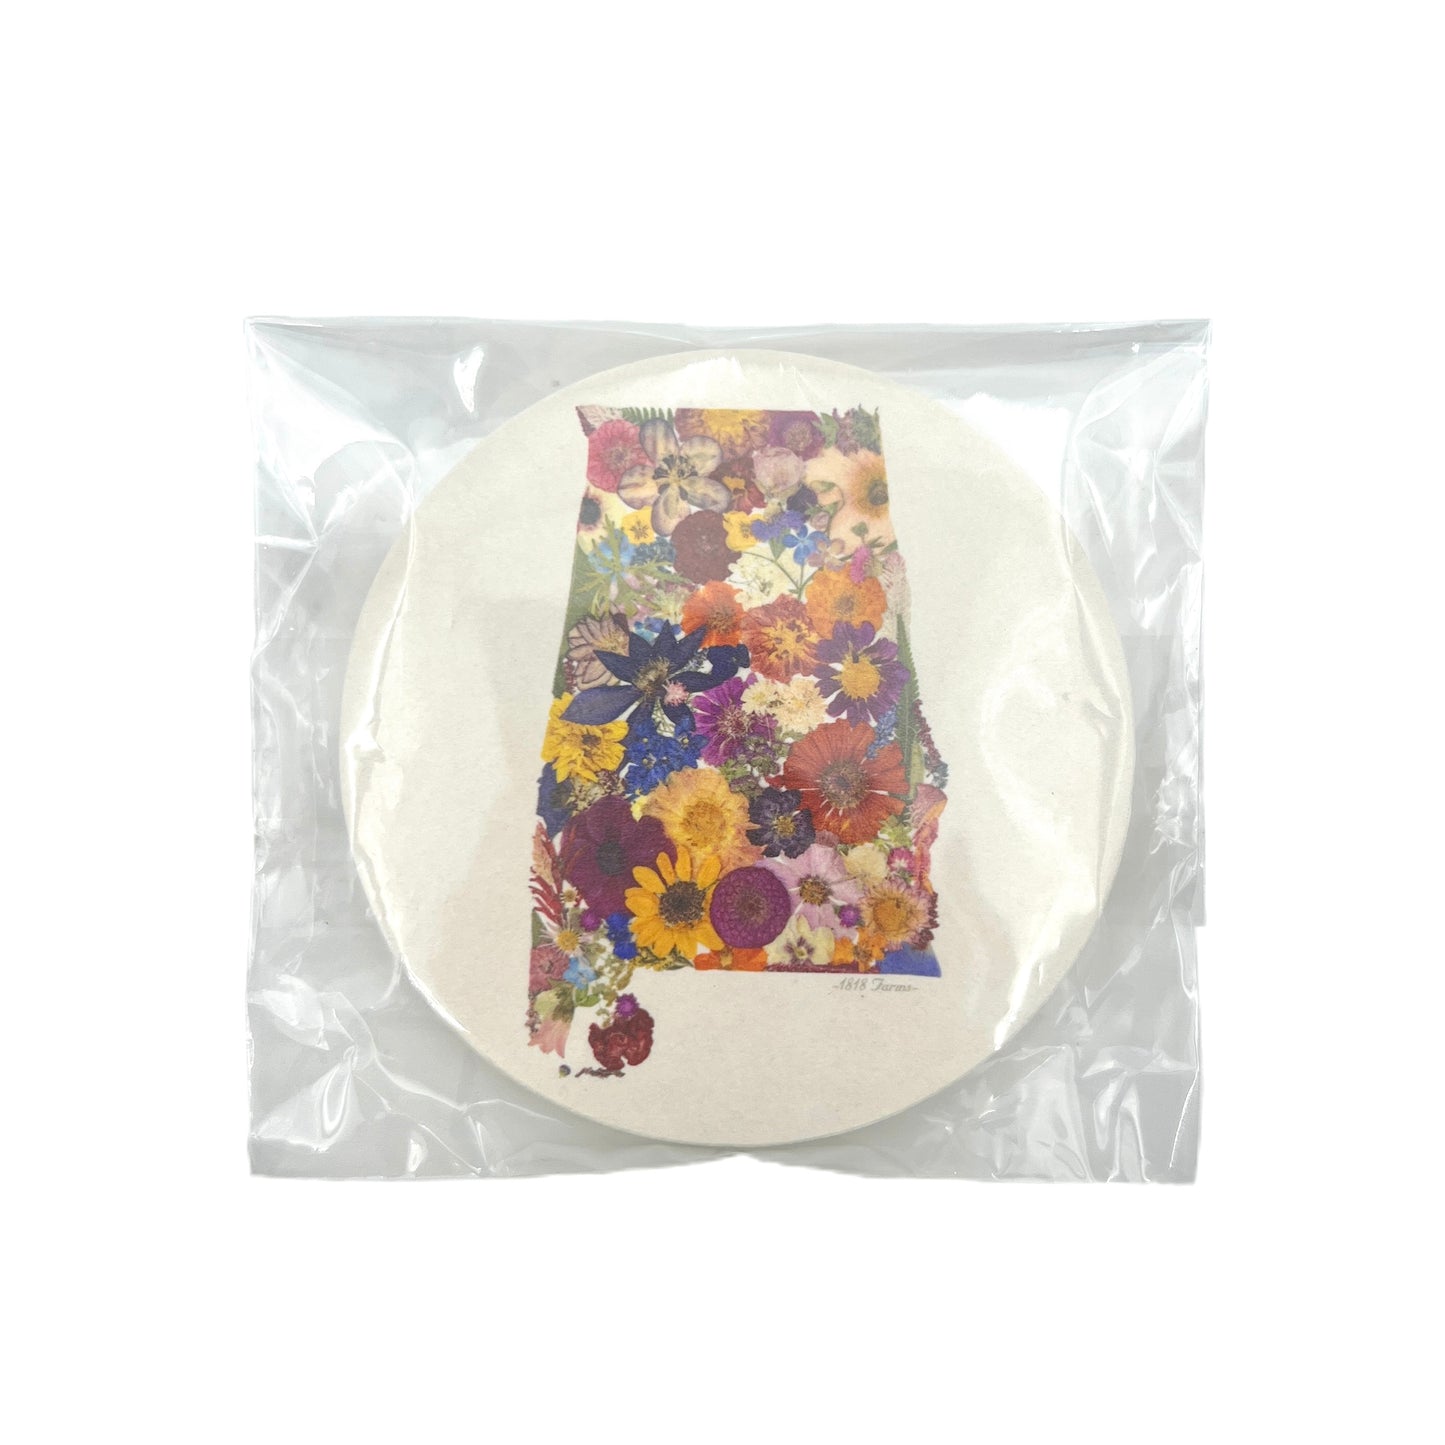 State Themed Drink Coasters (Set of 6) Featuring Dried, Pressed Flowers - "Where I Bloom" Collection Coaster 1818 Farms   